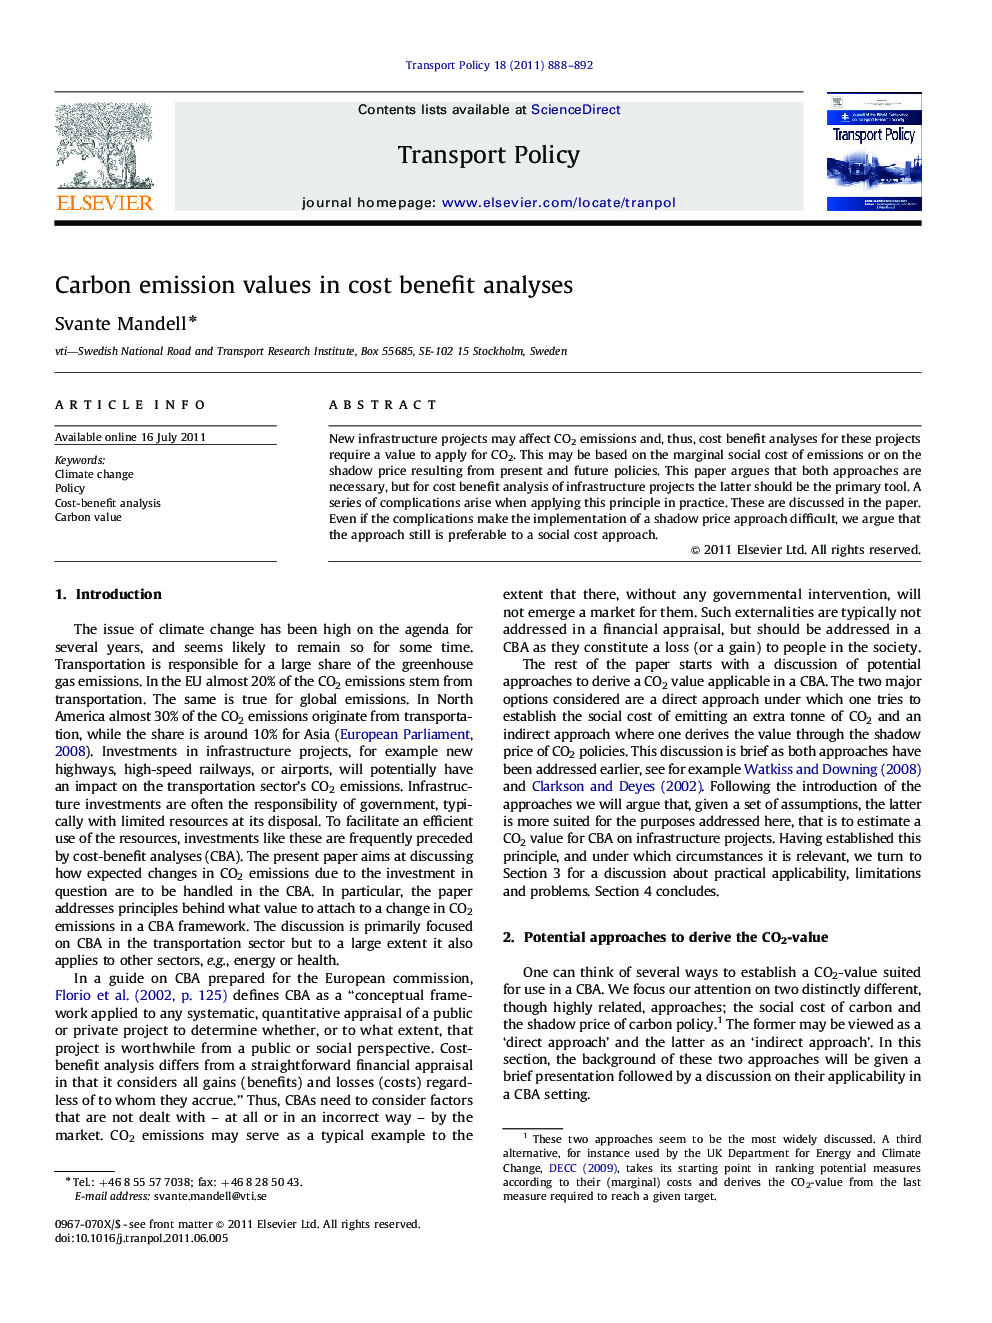 Carbon emission values in cost benefit analyses